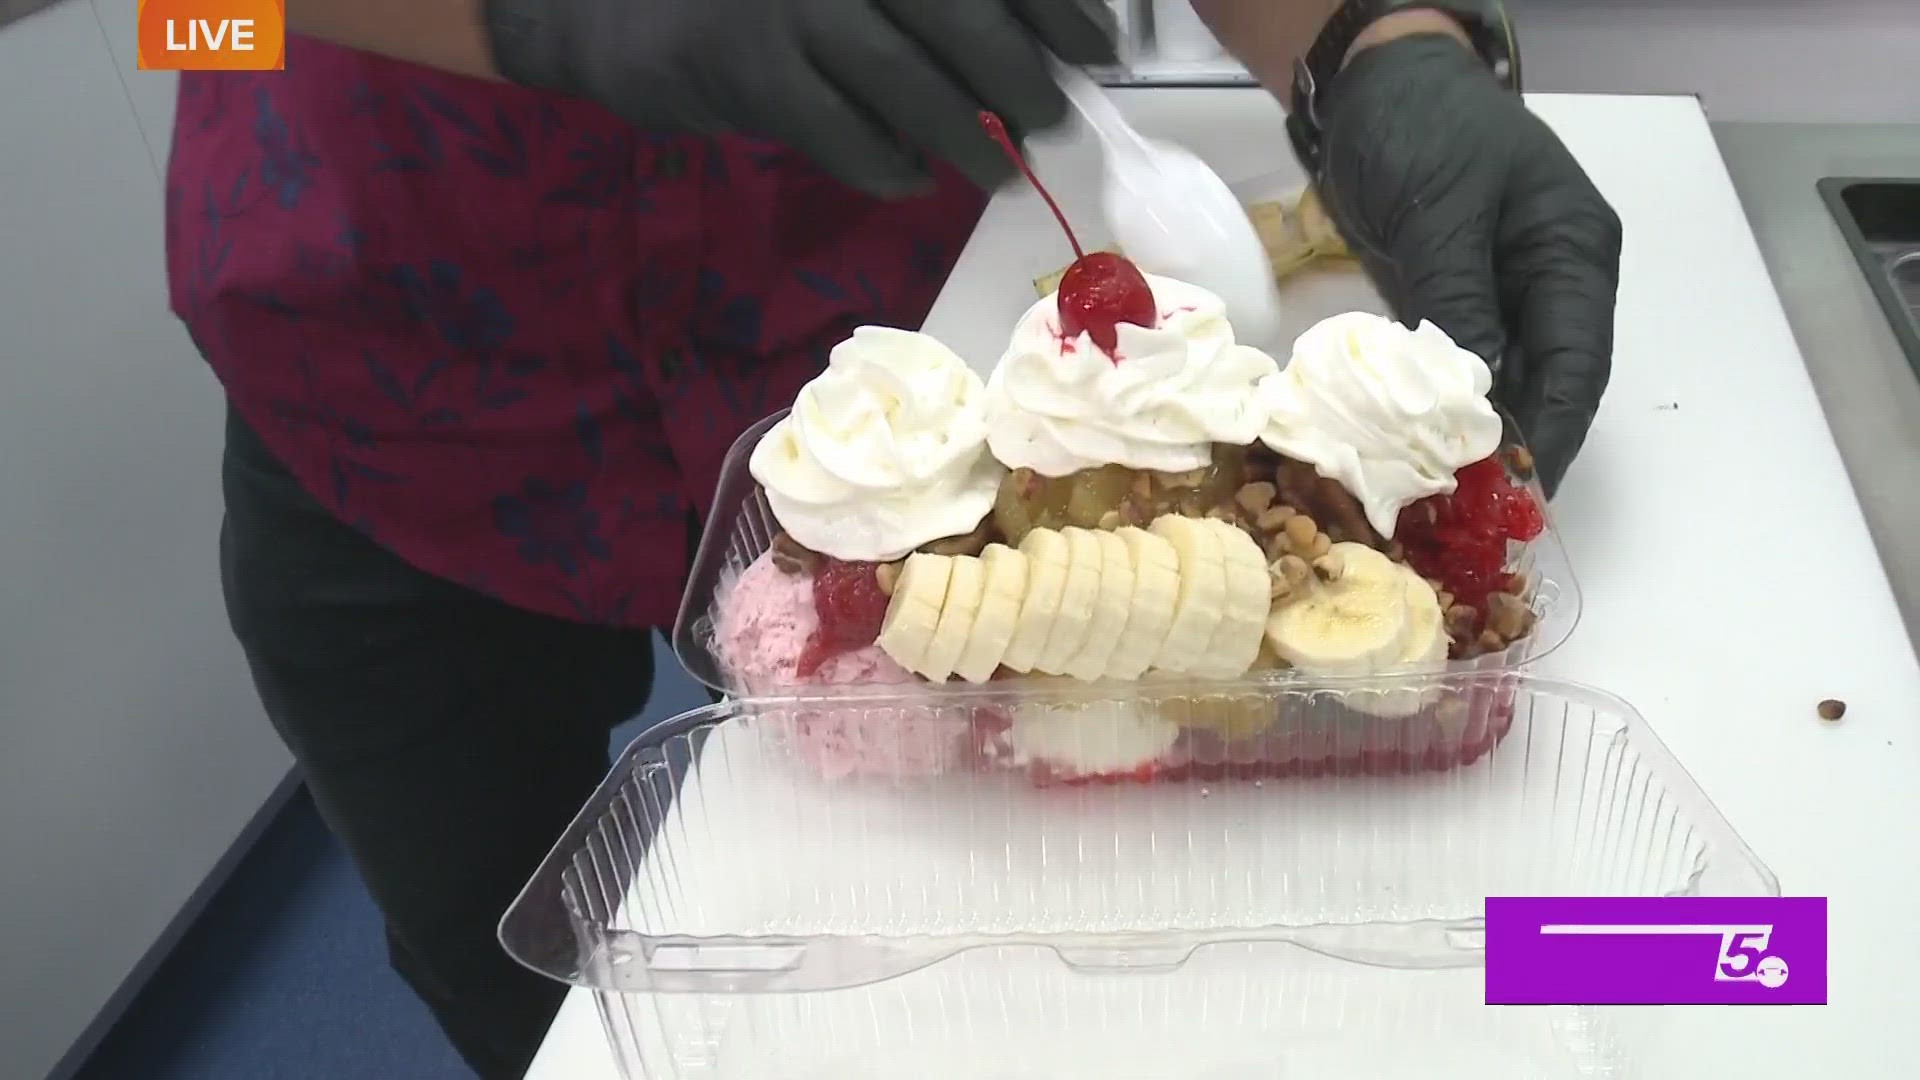 Paul visits the new Handel's Ice Cream shop to see what delicious treats they're offering.